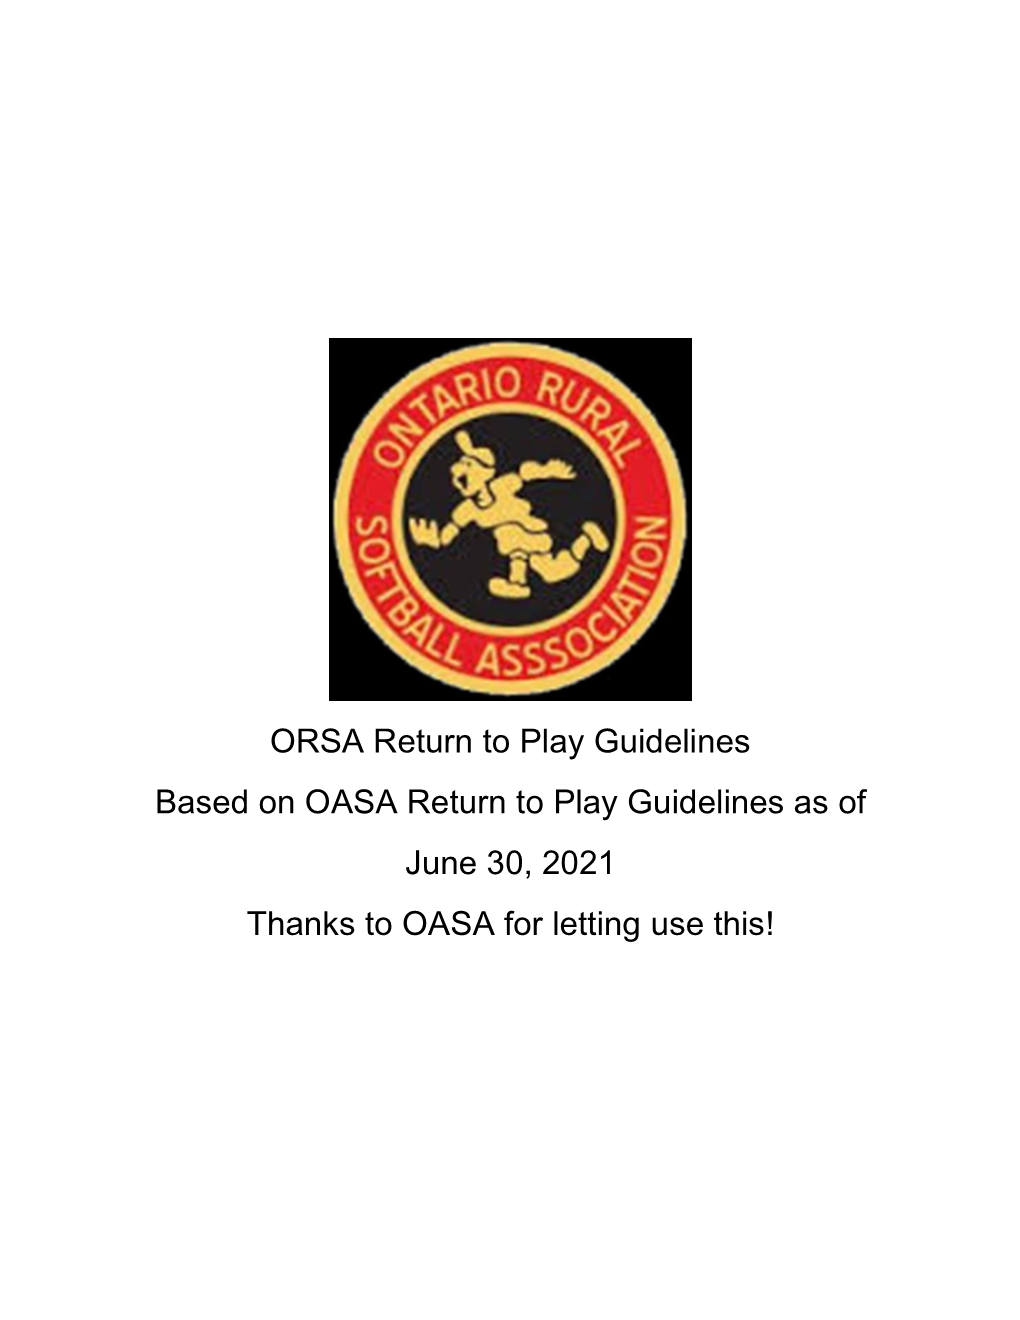 ORSA Return to Play Guidelines Based on OASA Return to Play Guidelines As of June 30, 2021 Thanks to OASA for Letting Use This!